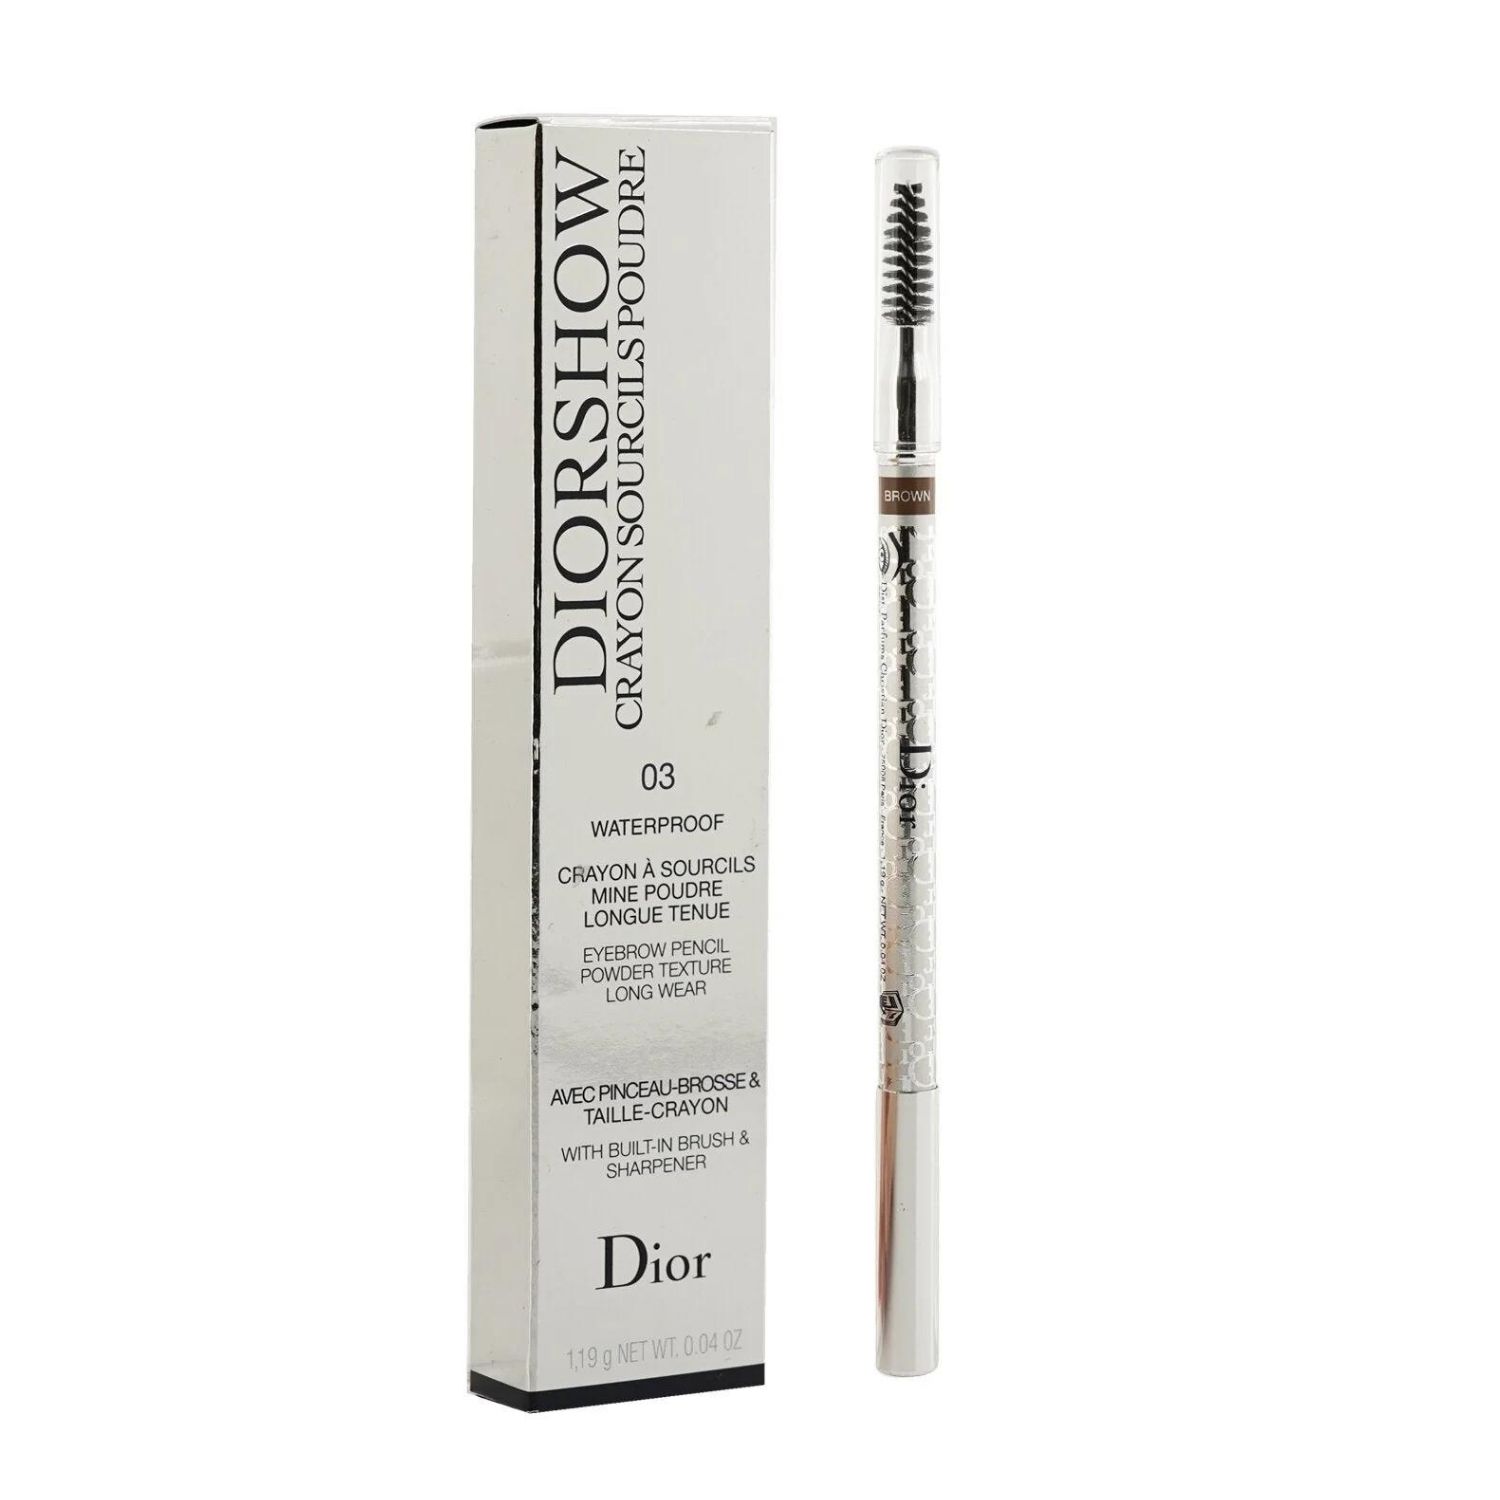 Diorshow Waterproof Crayon Sourcils Poudre - # 03 Brown - 1.19g/0.04oz - image 1 of 5